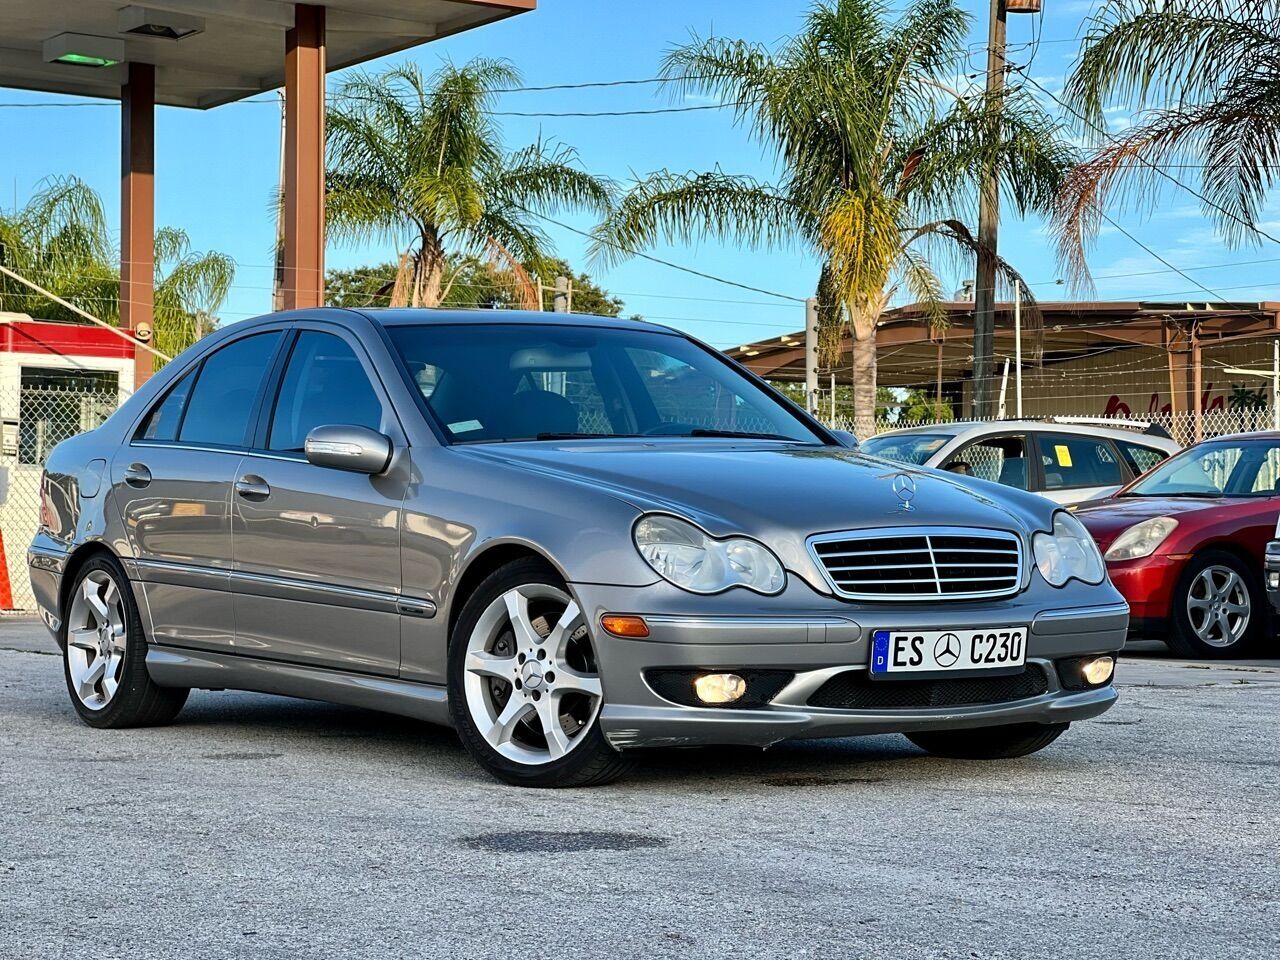 2007 Mercedes-Benz C-Class For Sale In Florida - Carsforsale.com®